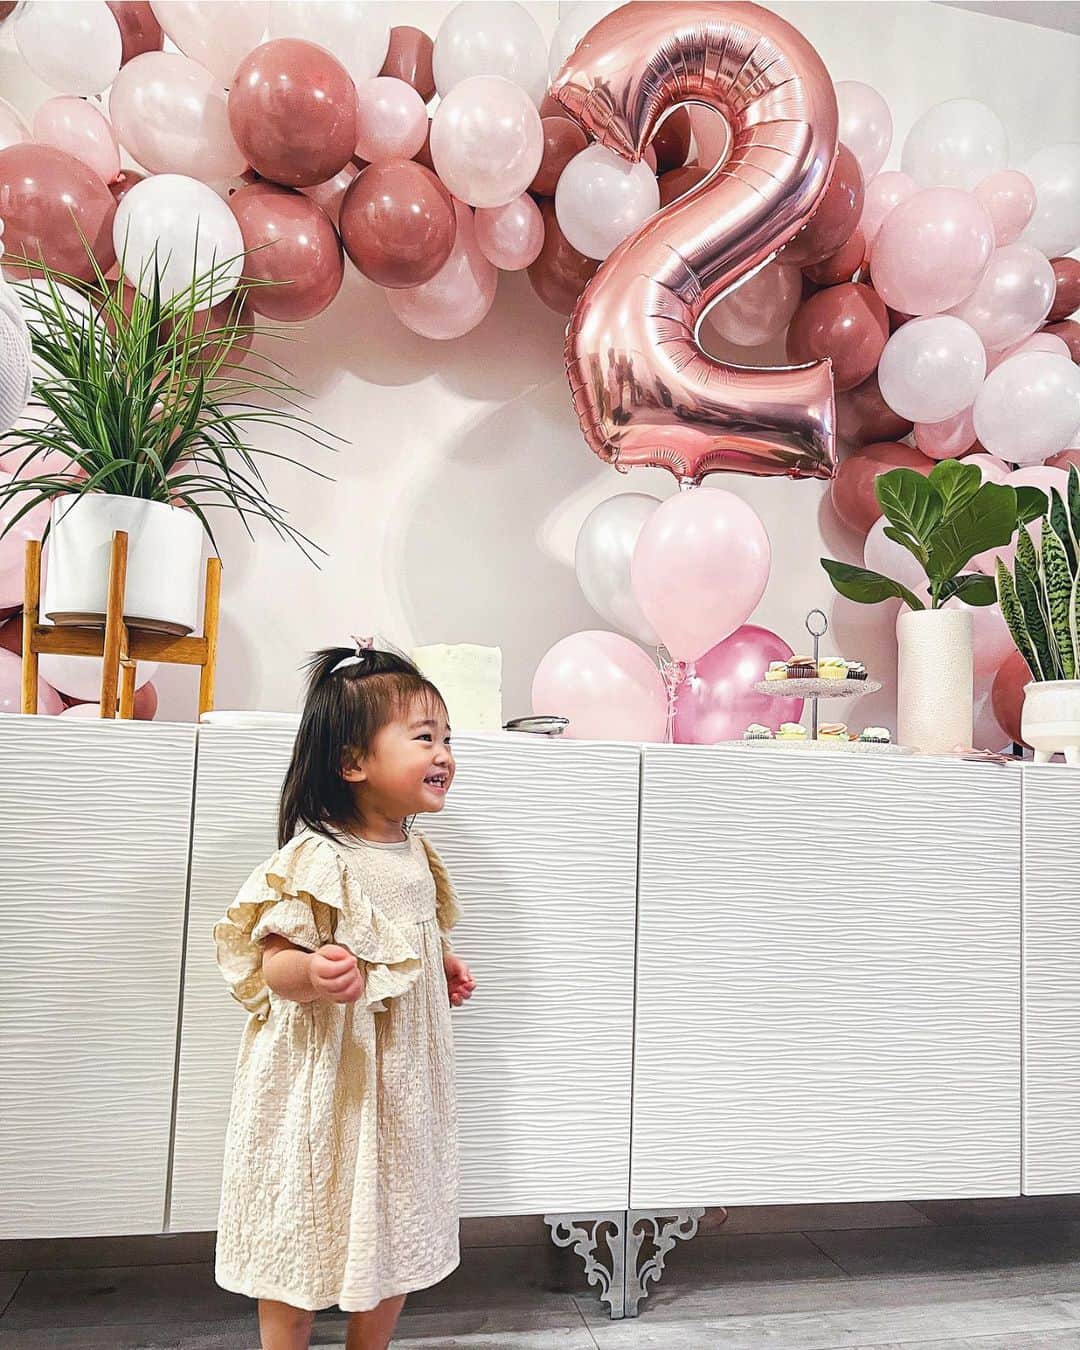 MayaTのインスタグラム：「Happy 2nd birthday to this little human❤️  I’m one lucky mama to have a daughter like you, cutie! Your smiles and laughs are my fuel to keep me going everyday.   I've lived in Canada for over 10 years but raising a child oversea has been a challenge for so many reasons. There’s some times that I get frustrated or/and emotional. Some days are easier than the others. What I know is that I must enjoy every moment with you. You’re growing way too fast❤️🥲 Can’t wait to make more memories and watch you grow!   Love you so so much🥰」